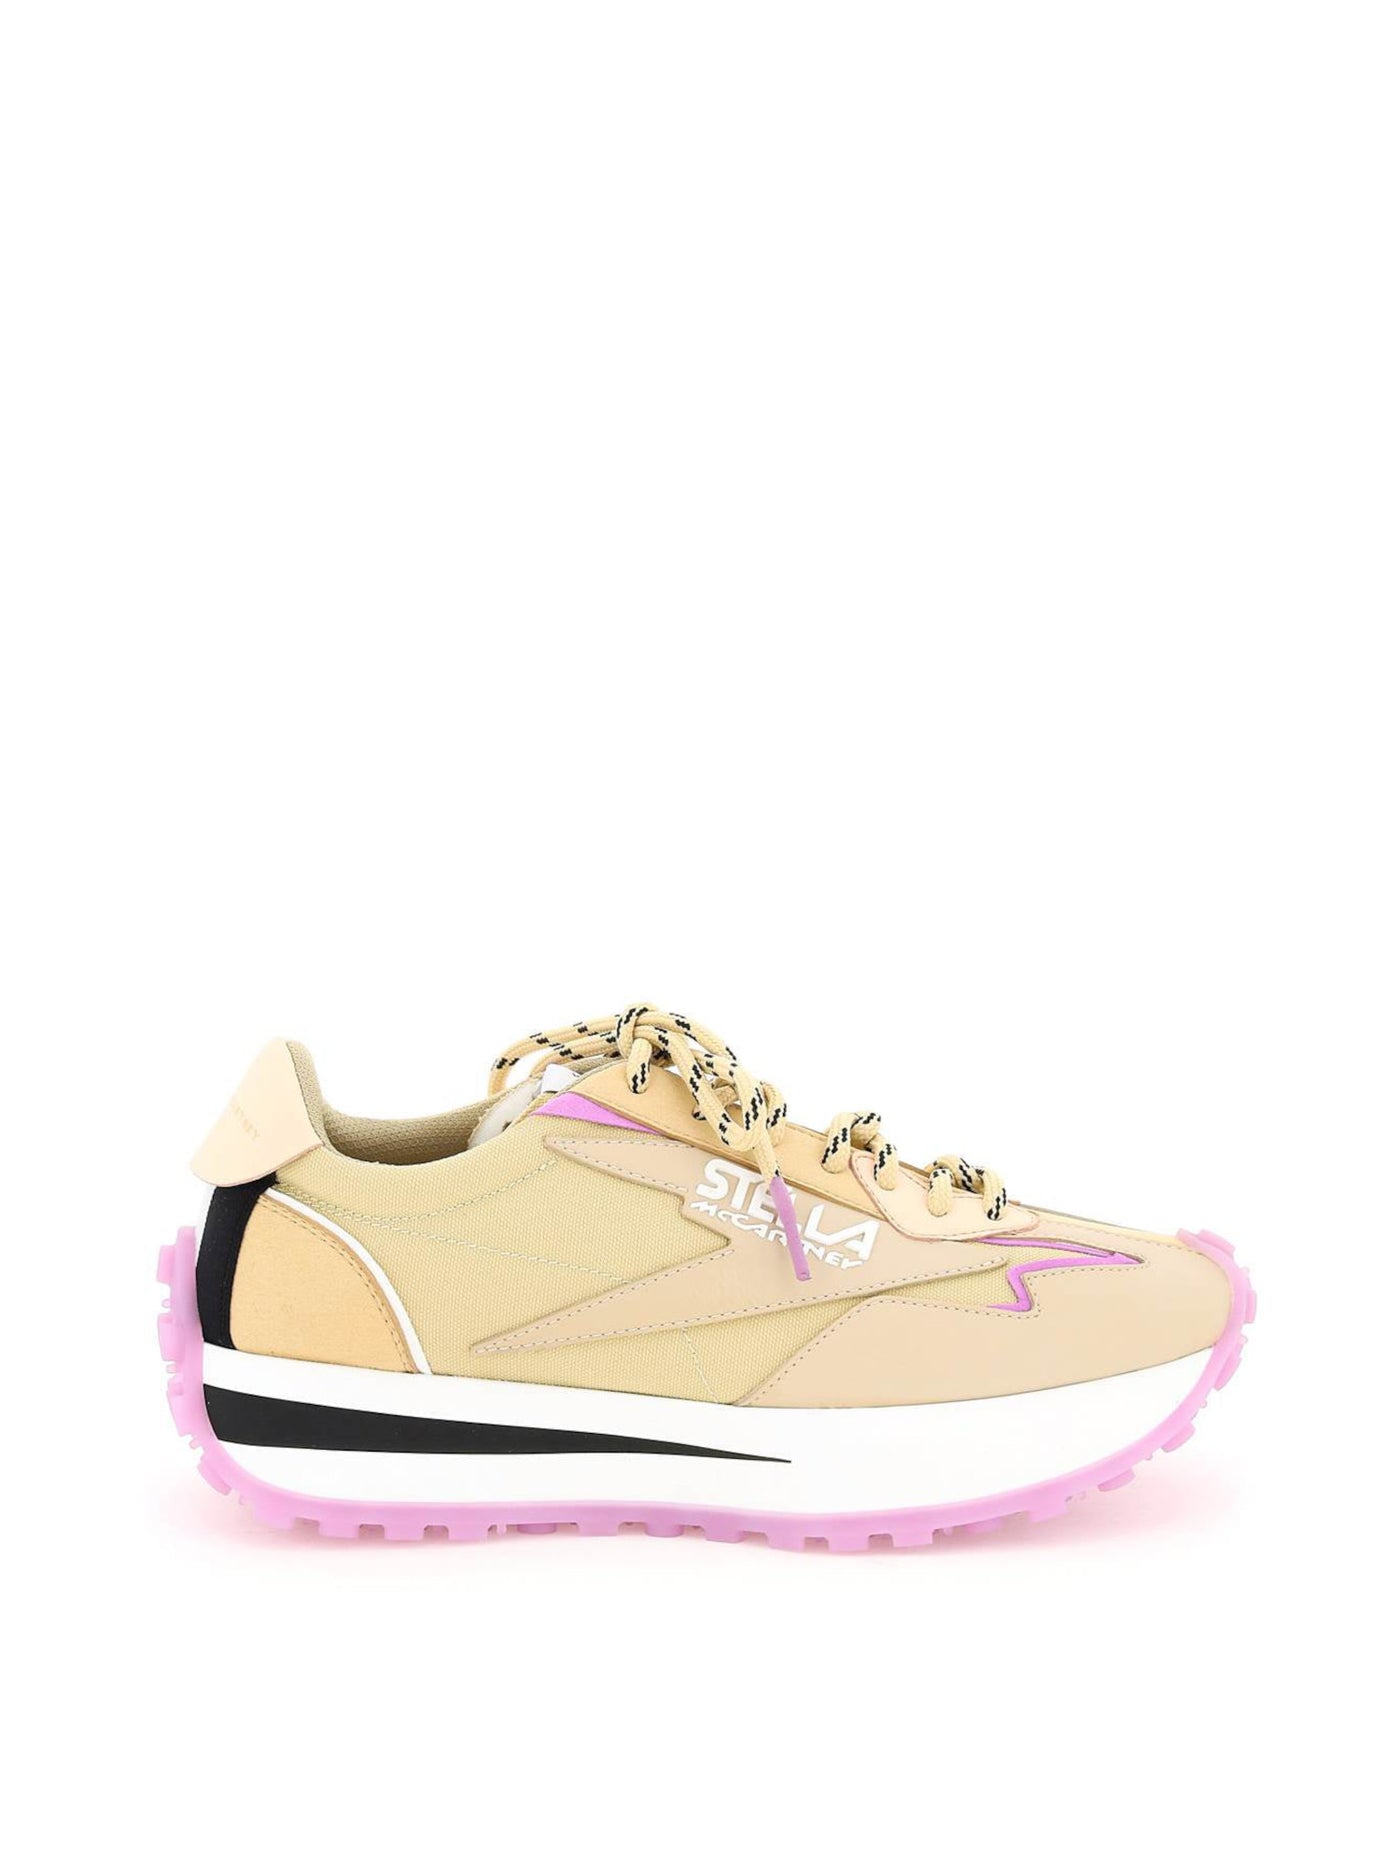 STELLAMCCARTNEY Womens Beige 1-1/2" Platform Logo Removable Insole Reclypse Almond Toe Lace-Up Athletic Sneakers Shoes 41